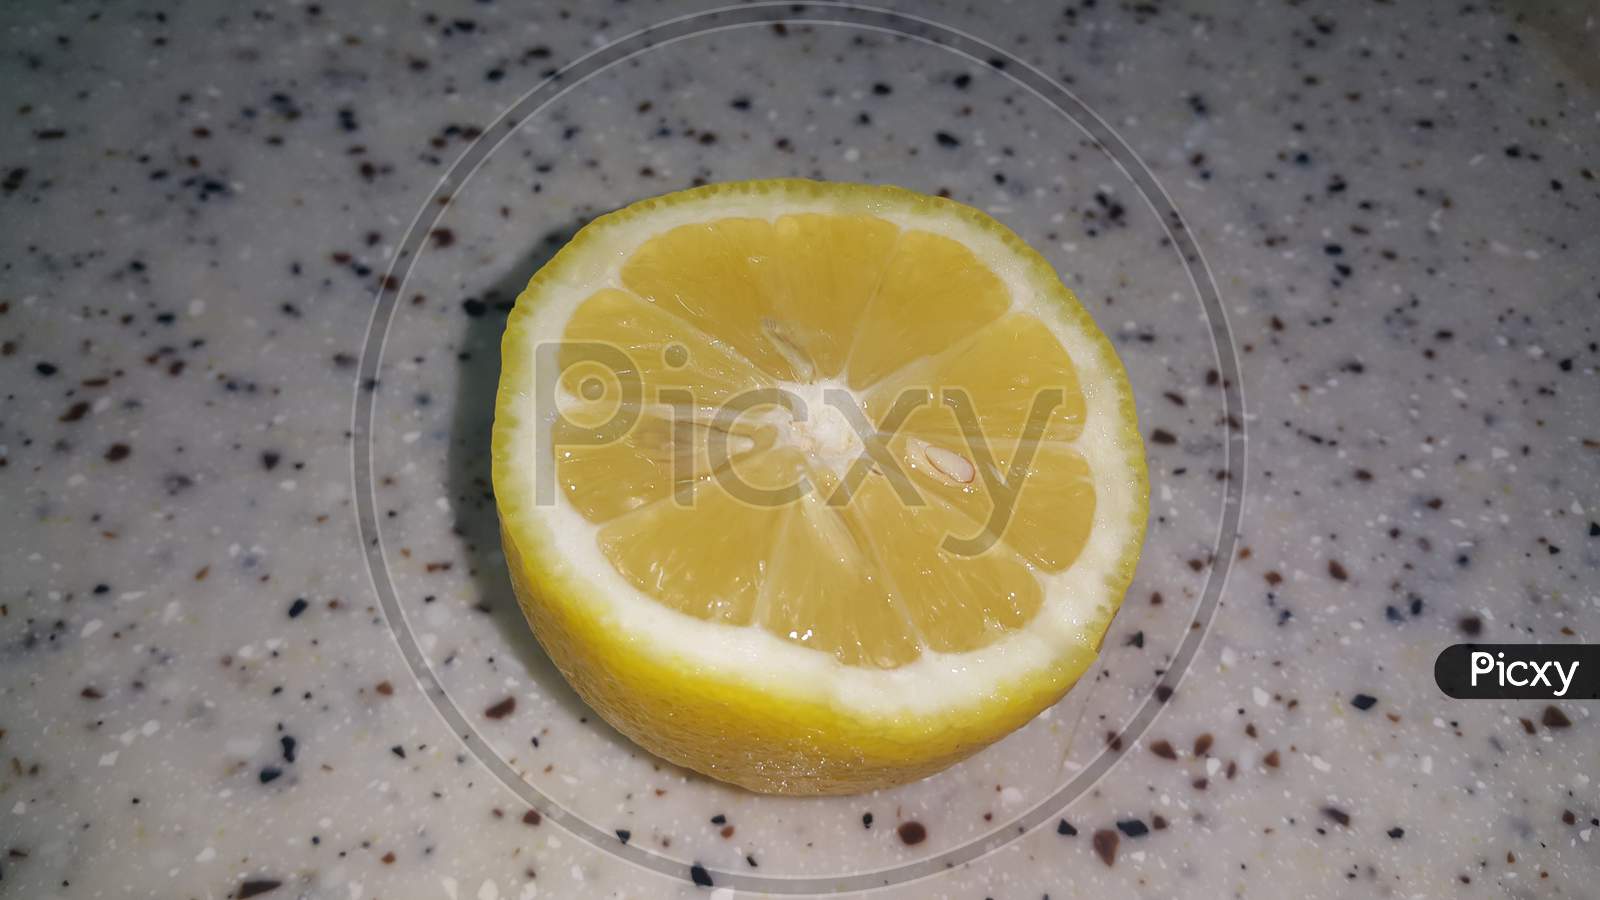 Fresh Lemon Slices With Yellow Peelings Placed On A Grey Floor